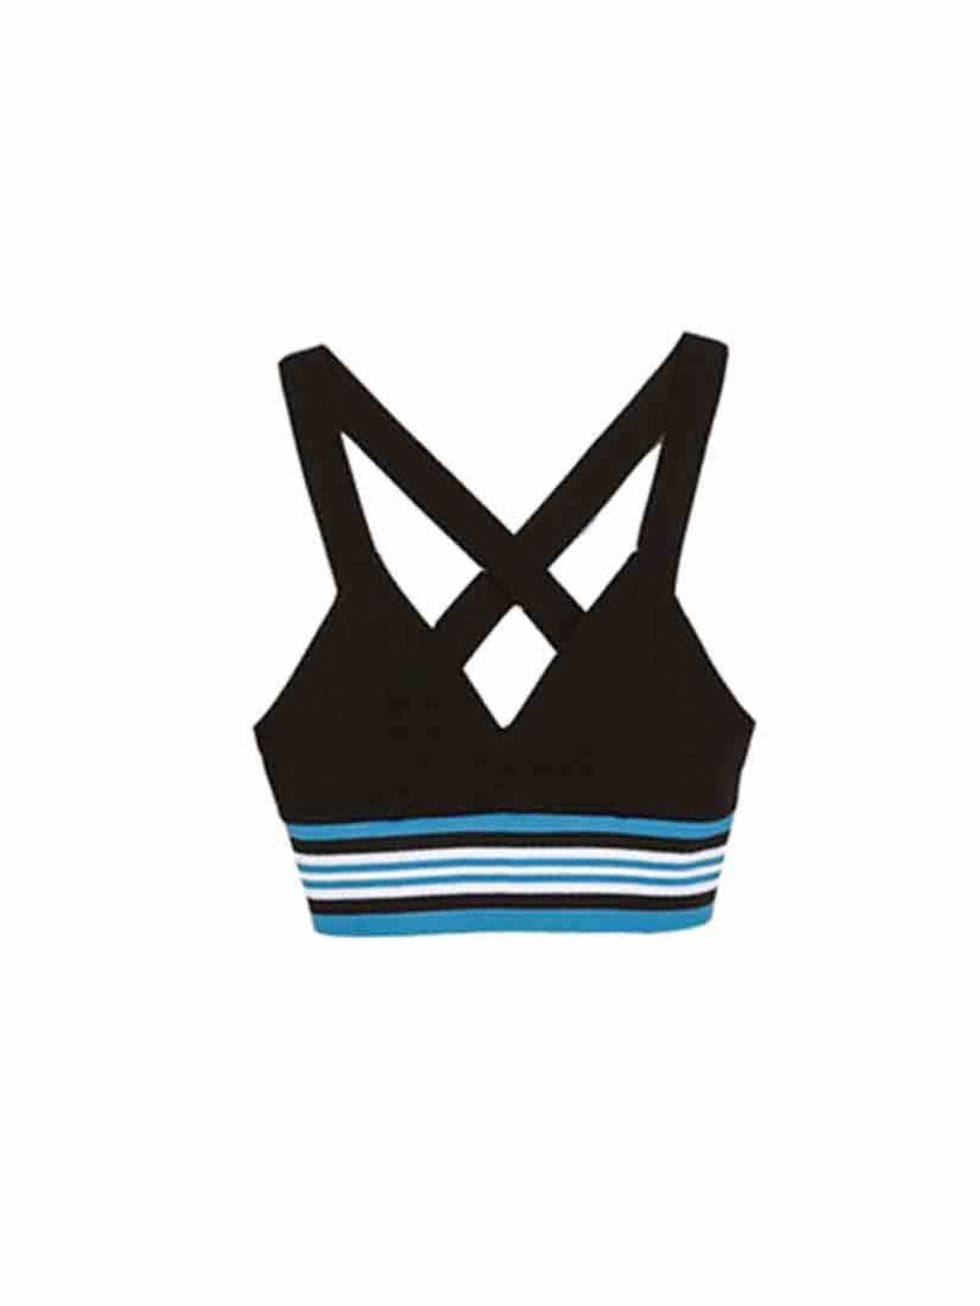 <p>Dare to bare, with this sporty crop top.</p><p><a href="http://www.zara.com/uk/en/woman/t-shirts/cropped-sporty-top-c358008p1769606.html">Top Zara £19.99</a></p>